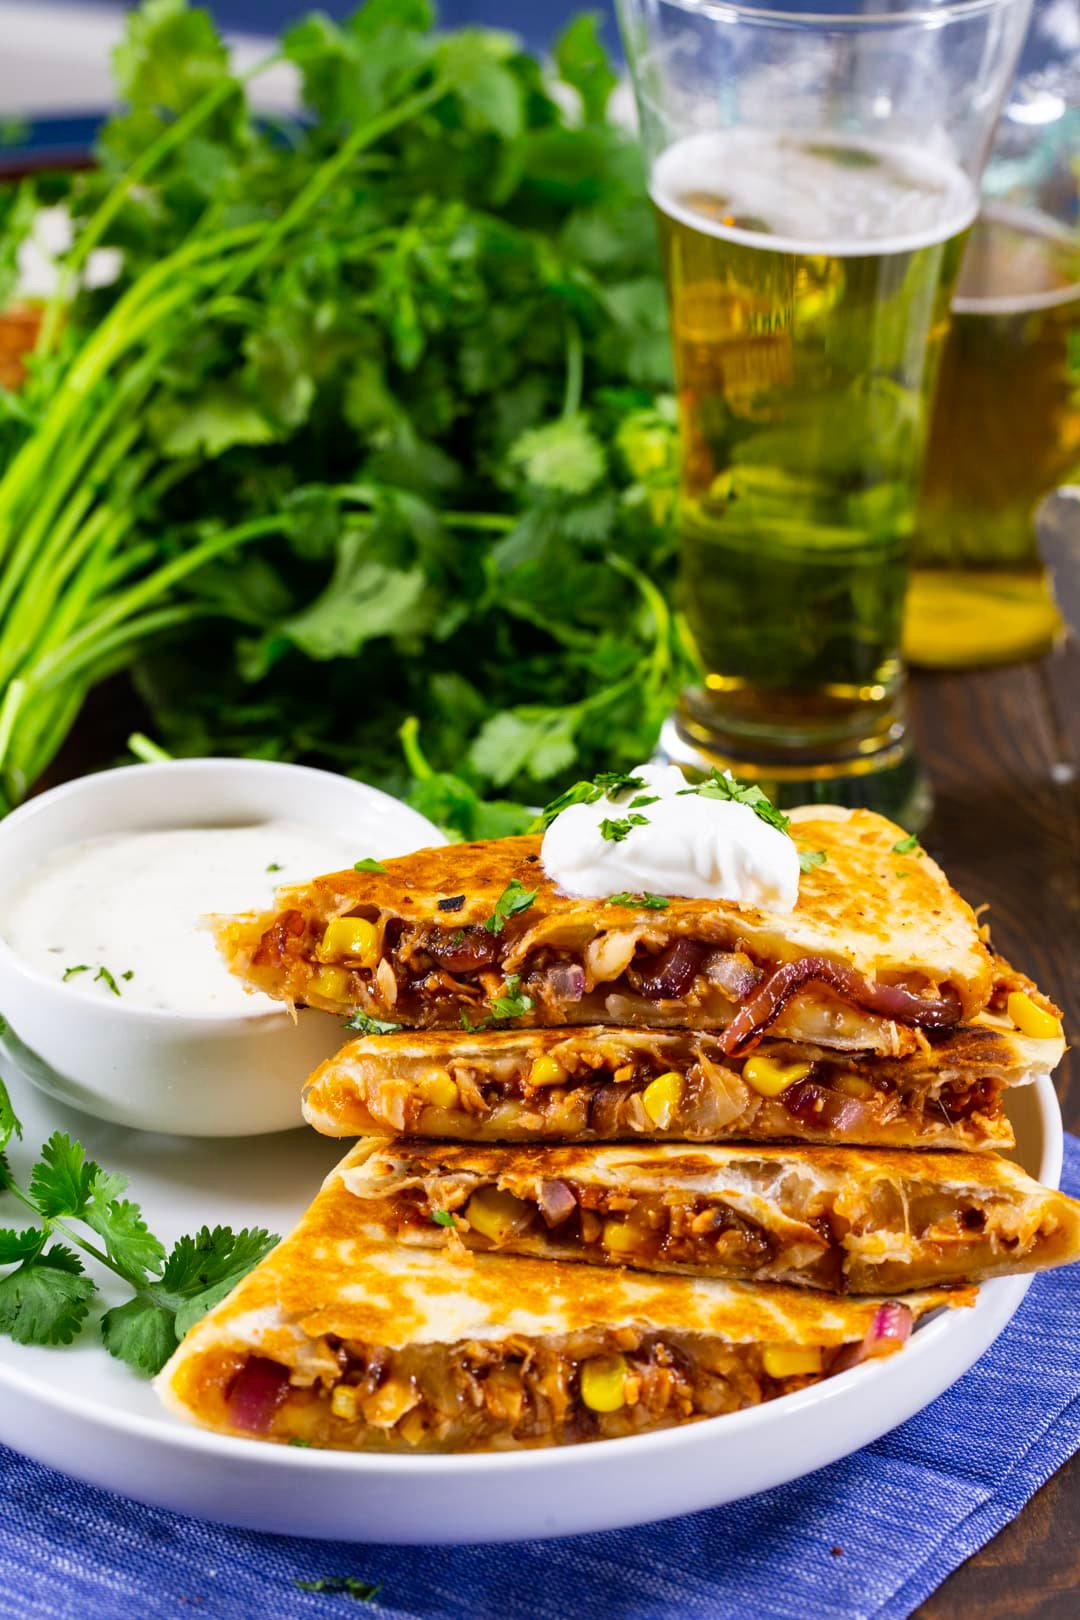 Quesadilla on a plate and glass of beer.